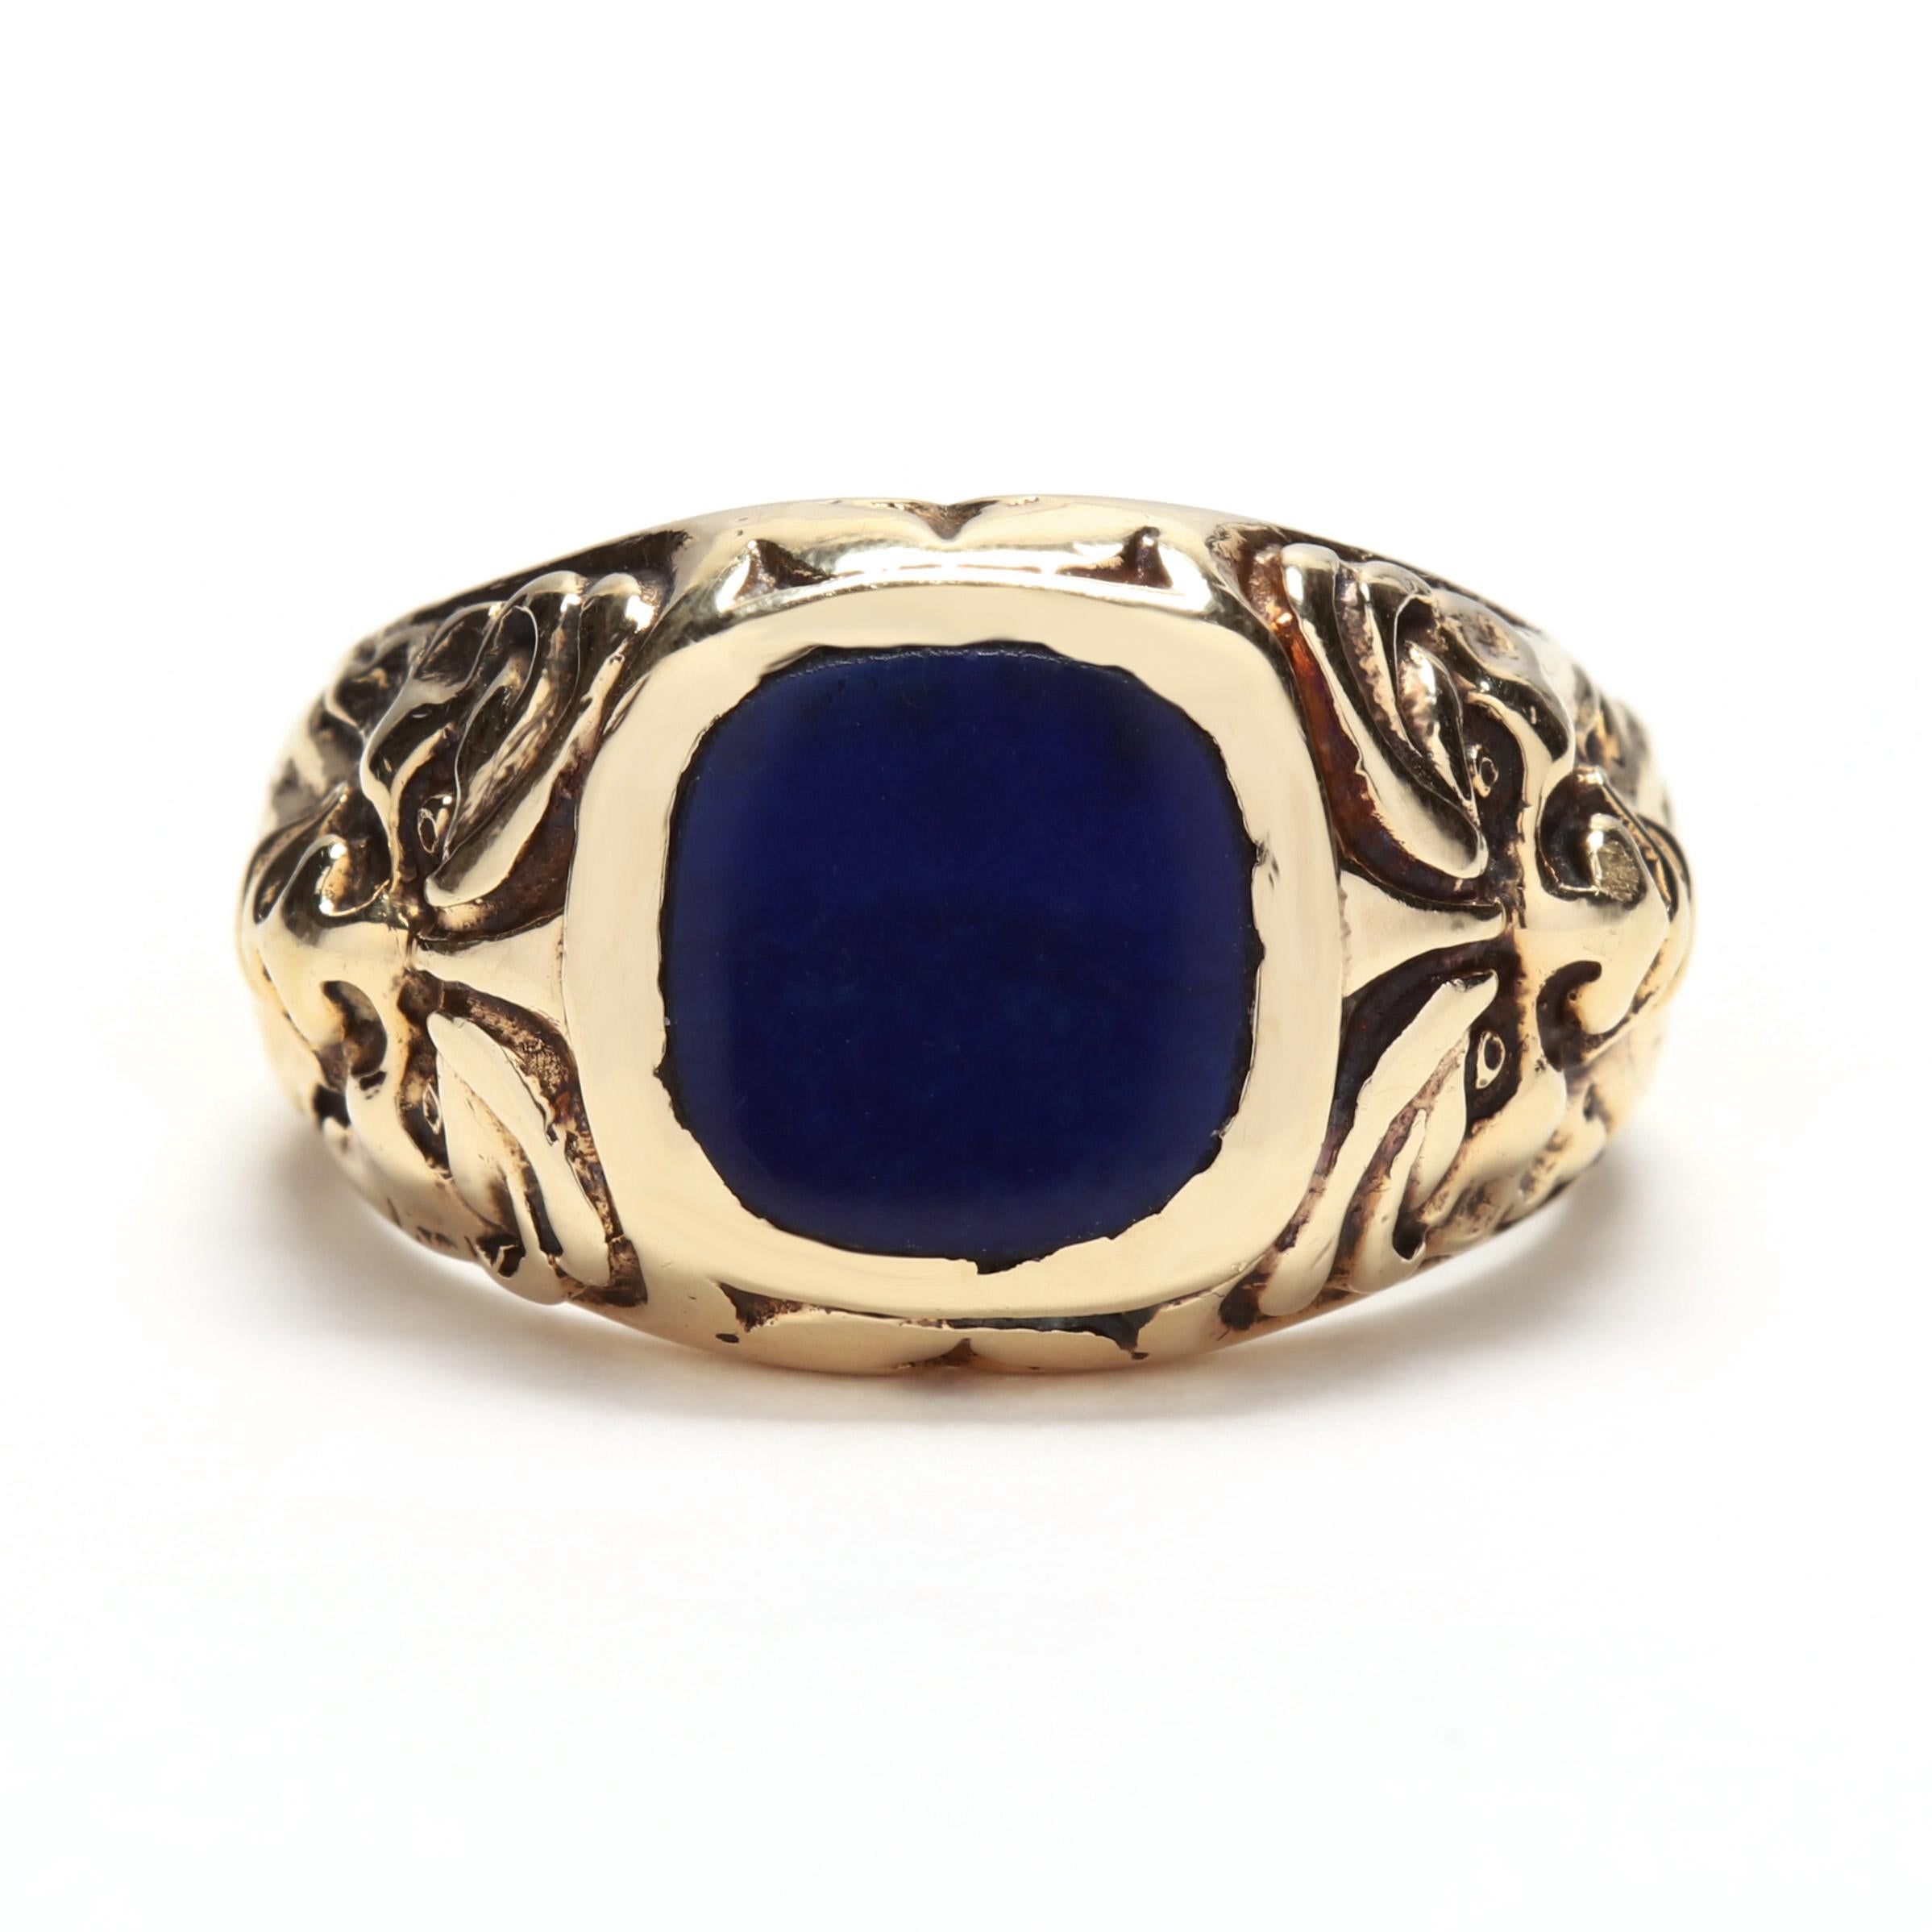 an unusual Art Deco era signet style ring with a flat, cushion cut lapis center stone and hand carved gargoyle faces on the shoulders.

Engraved: Joey I Love You Lisa
Slightly obscured hallmarks
8.13 dwts
Ring Size 8 - sizable